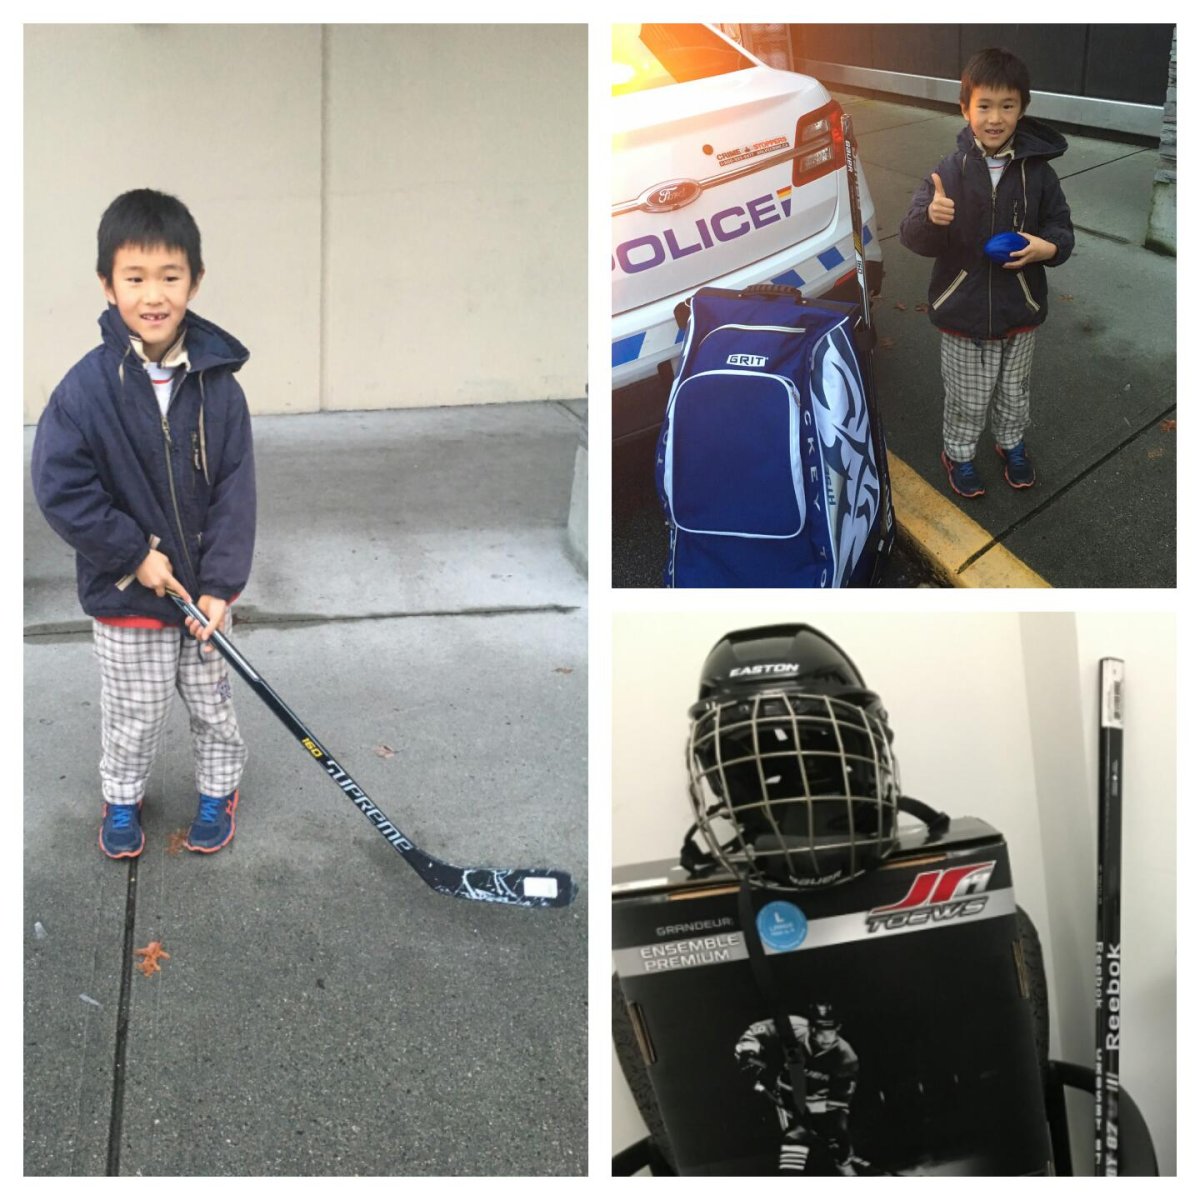 Six-year-old Grant is happy to have his hockey gear replaced.